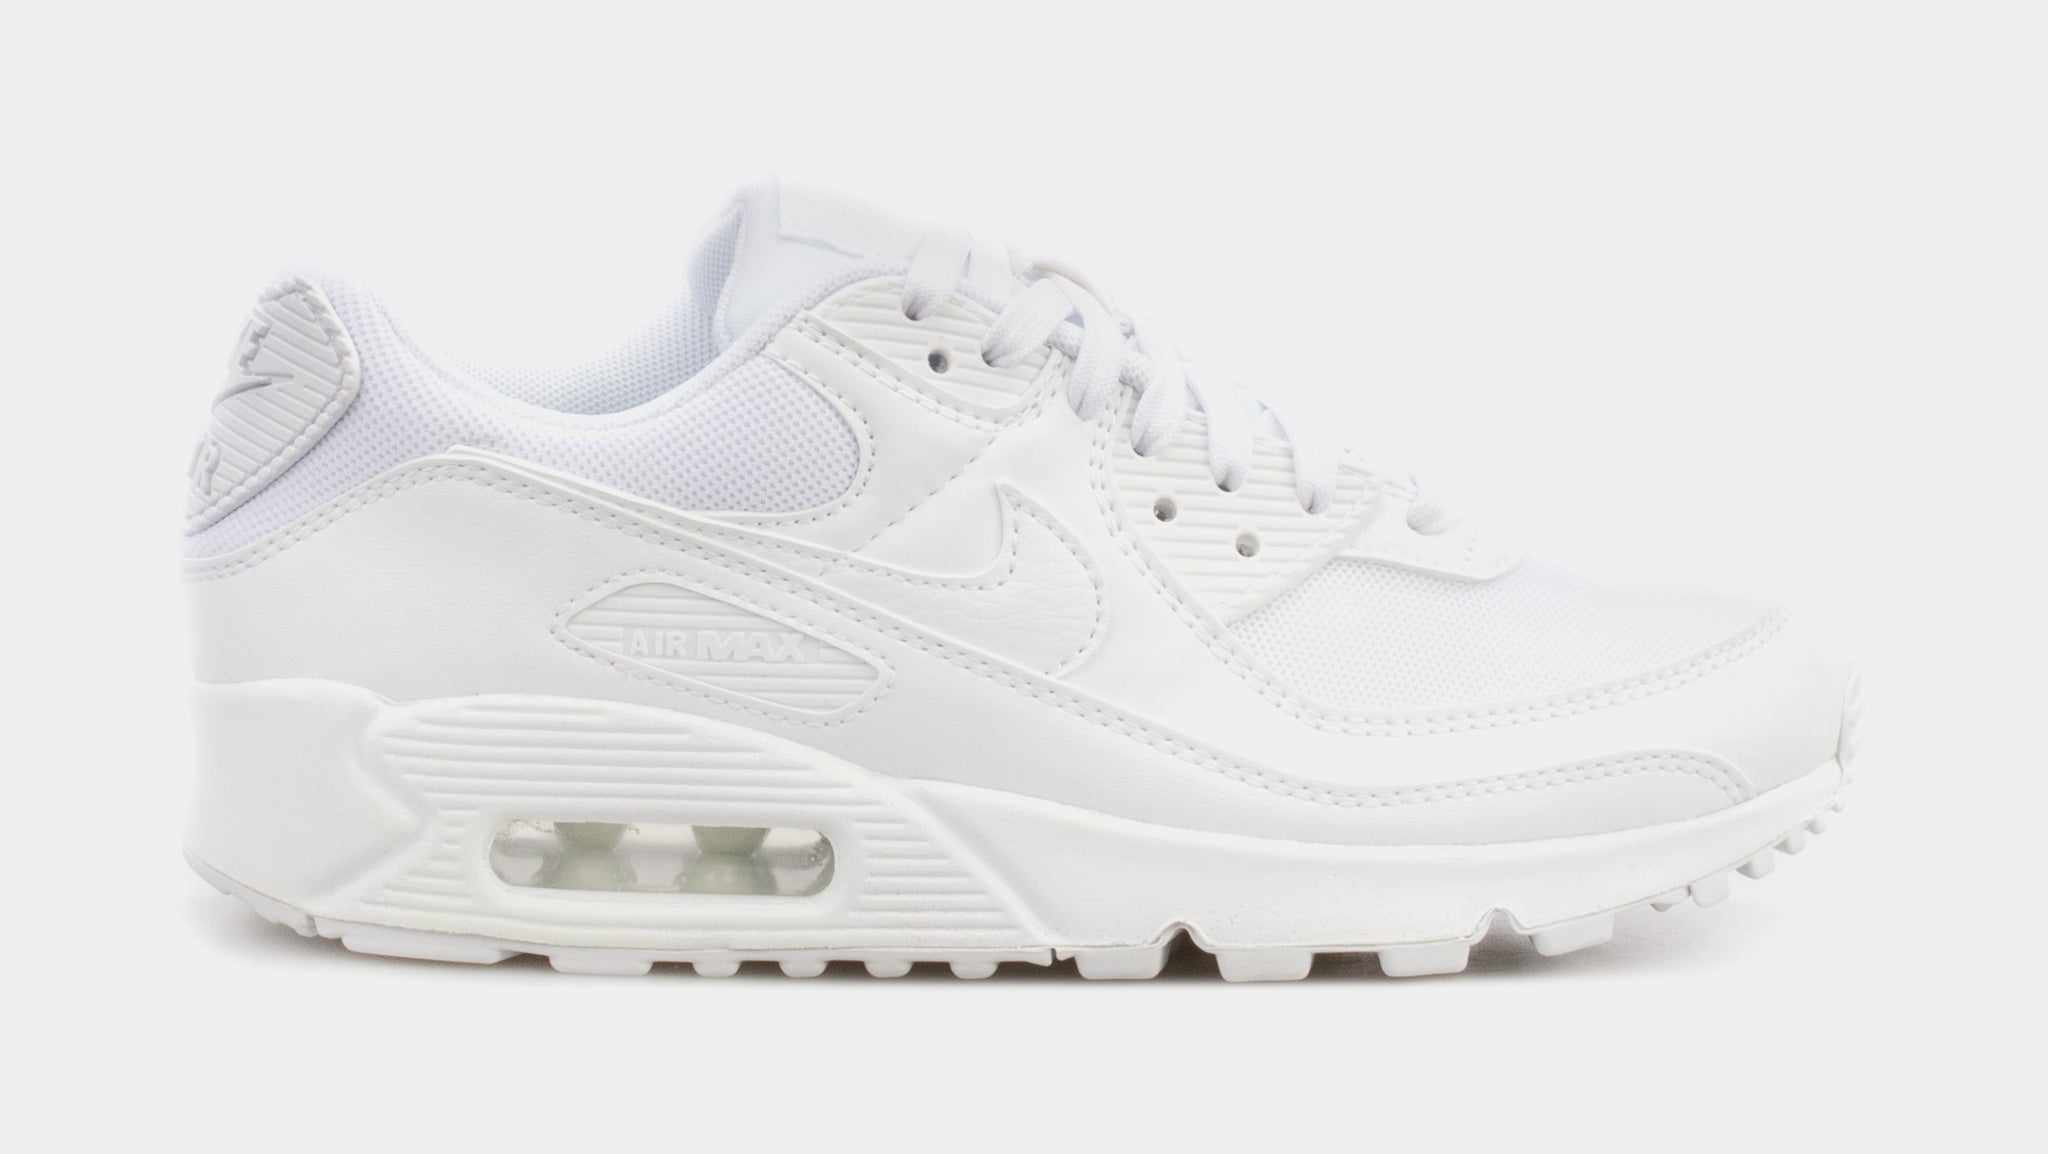 Diktere Diskutere Bebrejde Nike Air Max 90 Womens Lifestyle Shoes White DH8010-100 – Shoe Palace